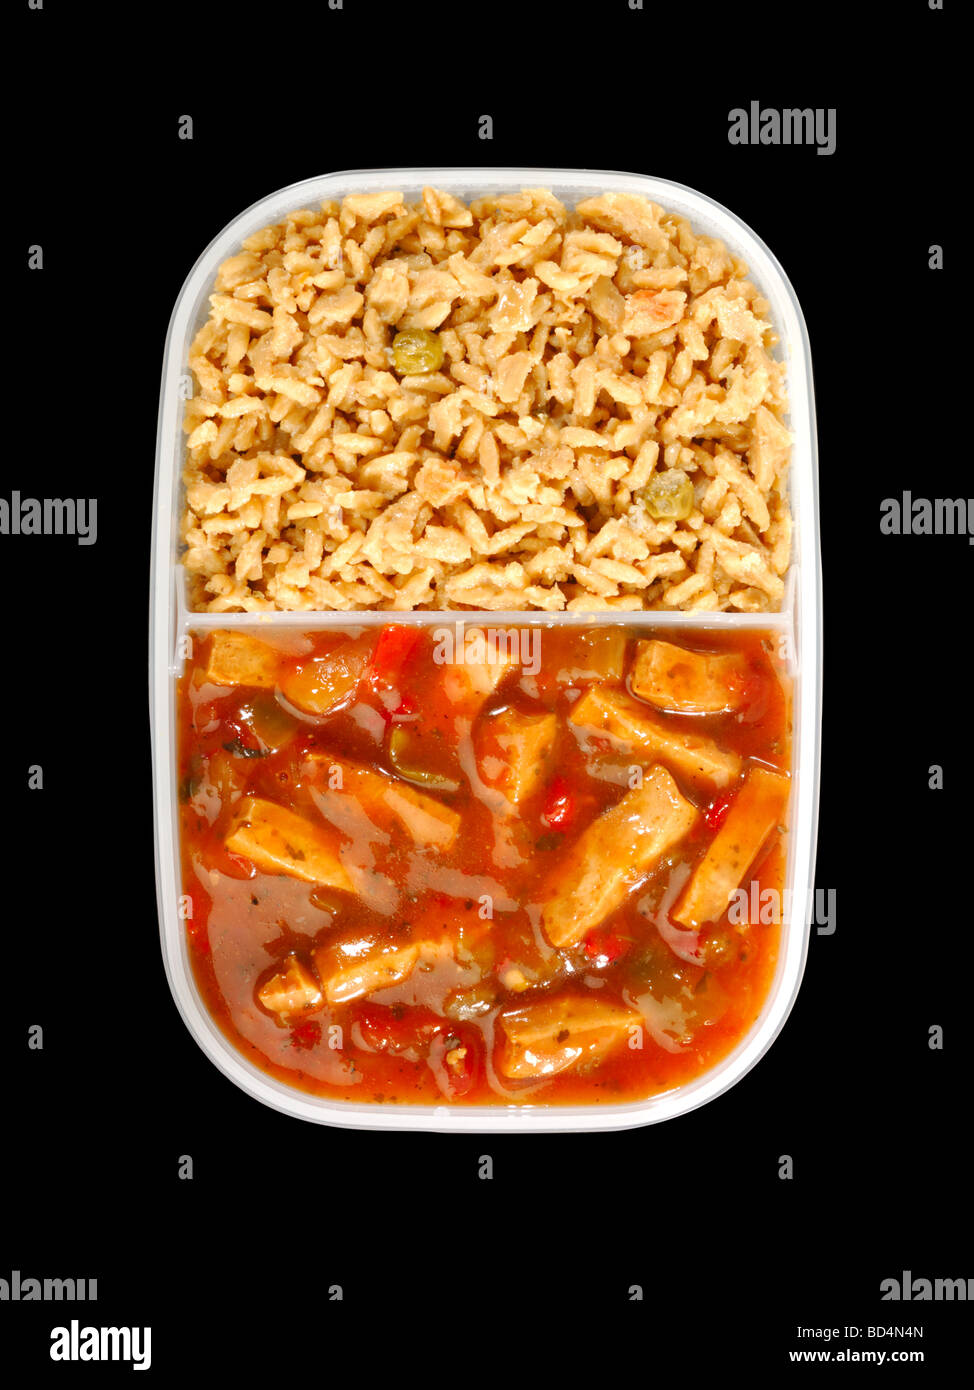 A plastic container with military food rations, chicken in spicy sauce with fried rice Stock Photo